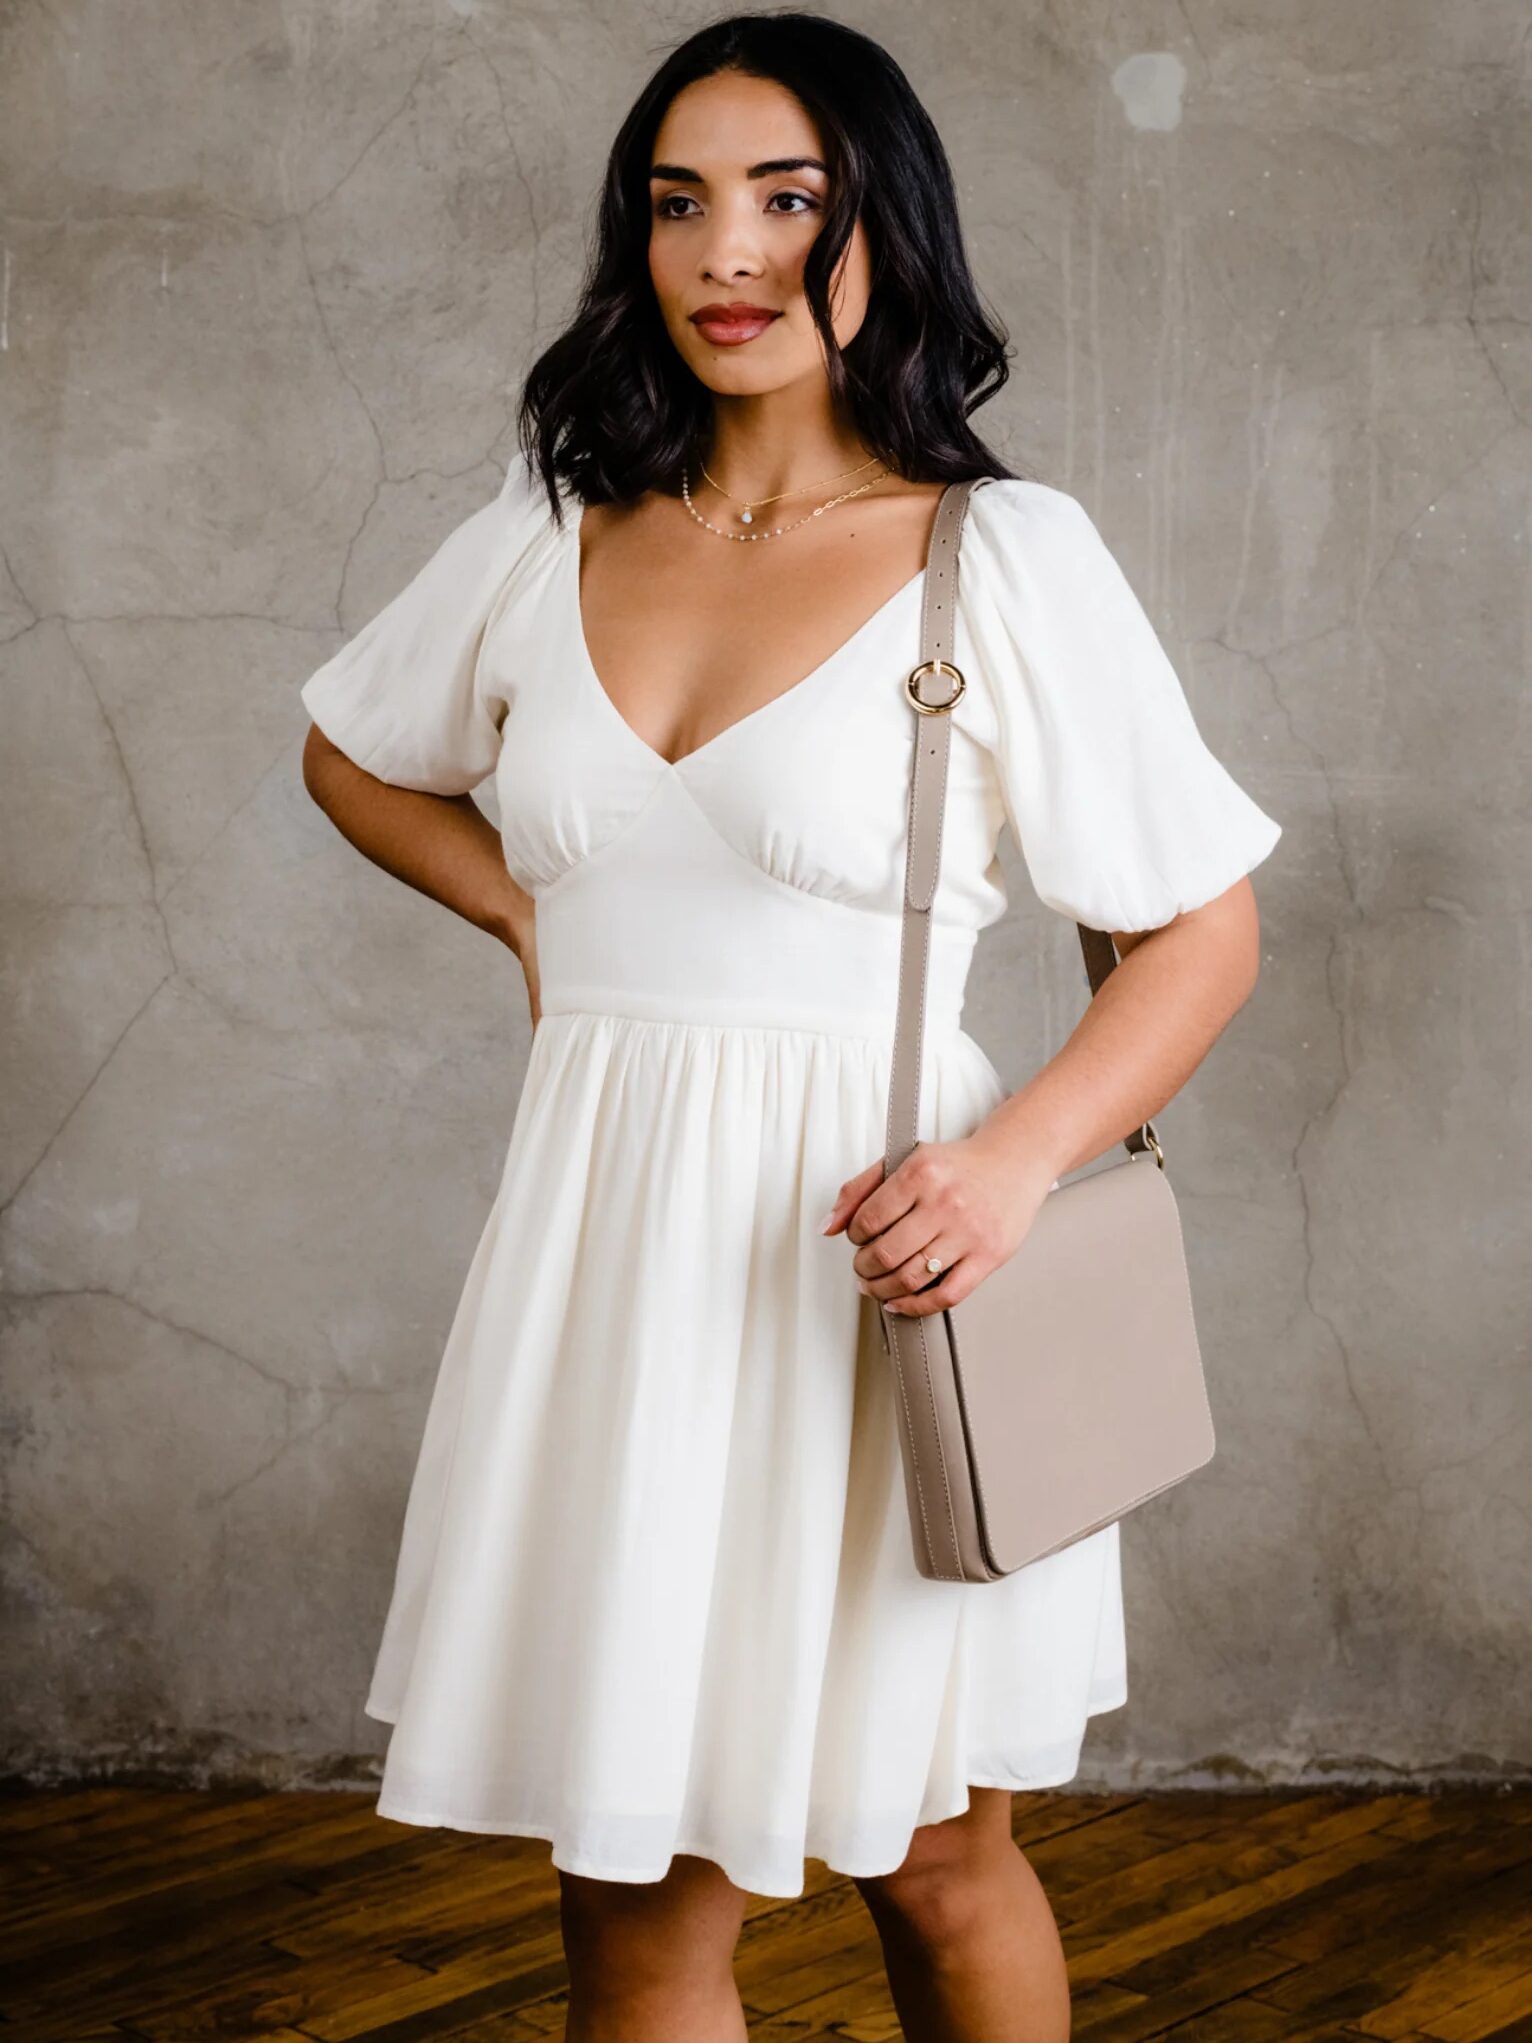 Woman in a white dress holding a beige shoulder bag standing against a textured wall.